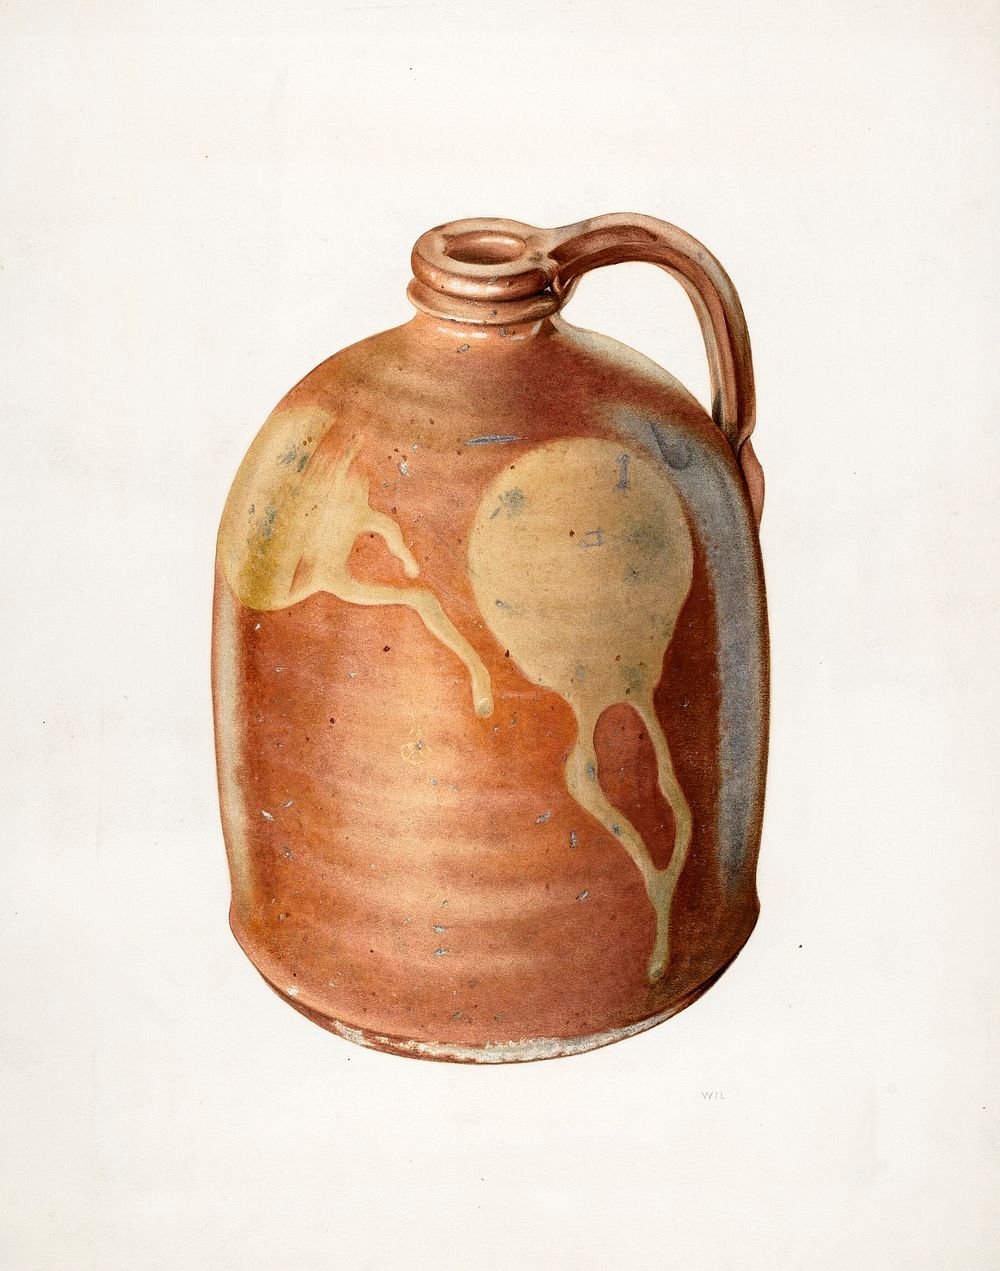 Galena Pottery Jug (ca. 1938) by William Spiecker. Original from The National Galley of Art. Digitally enhanced by rawpixel.